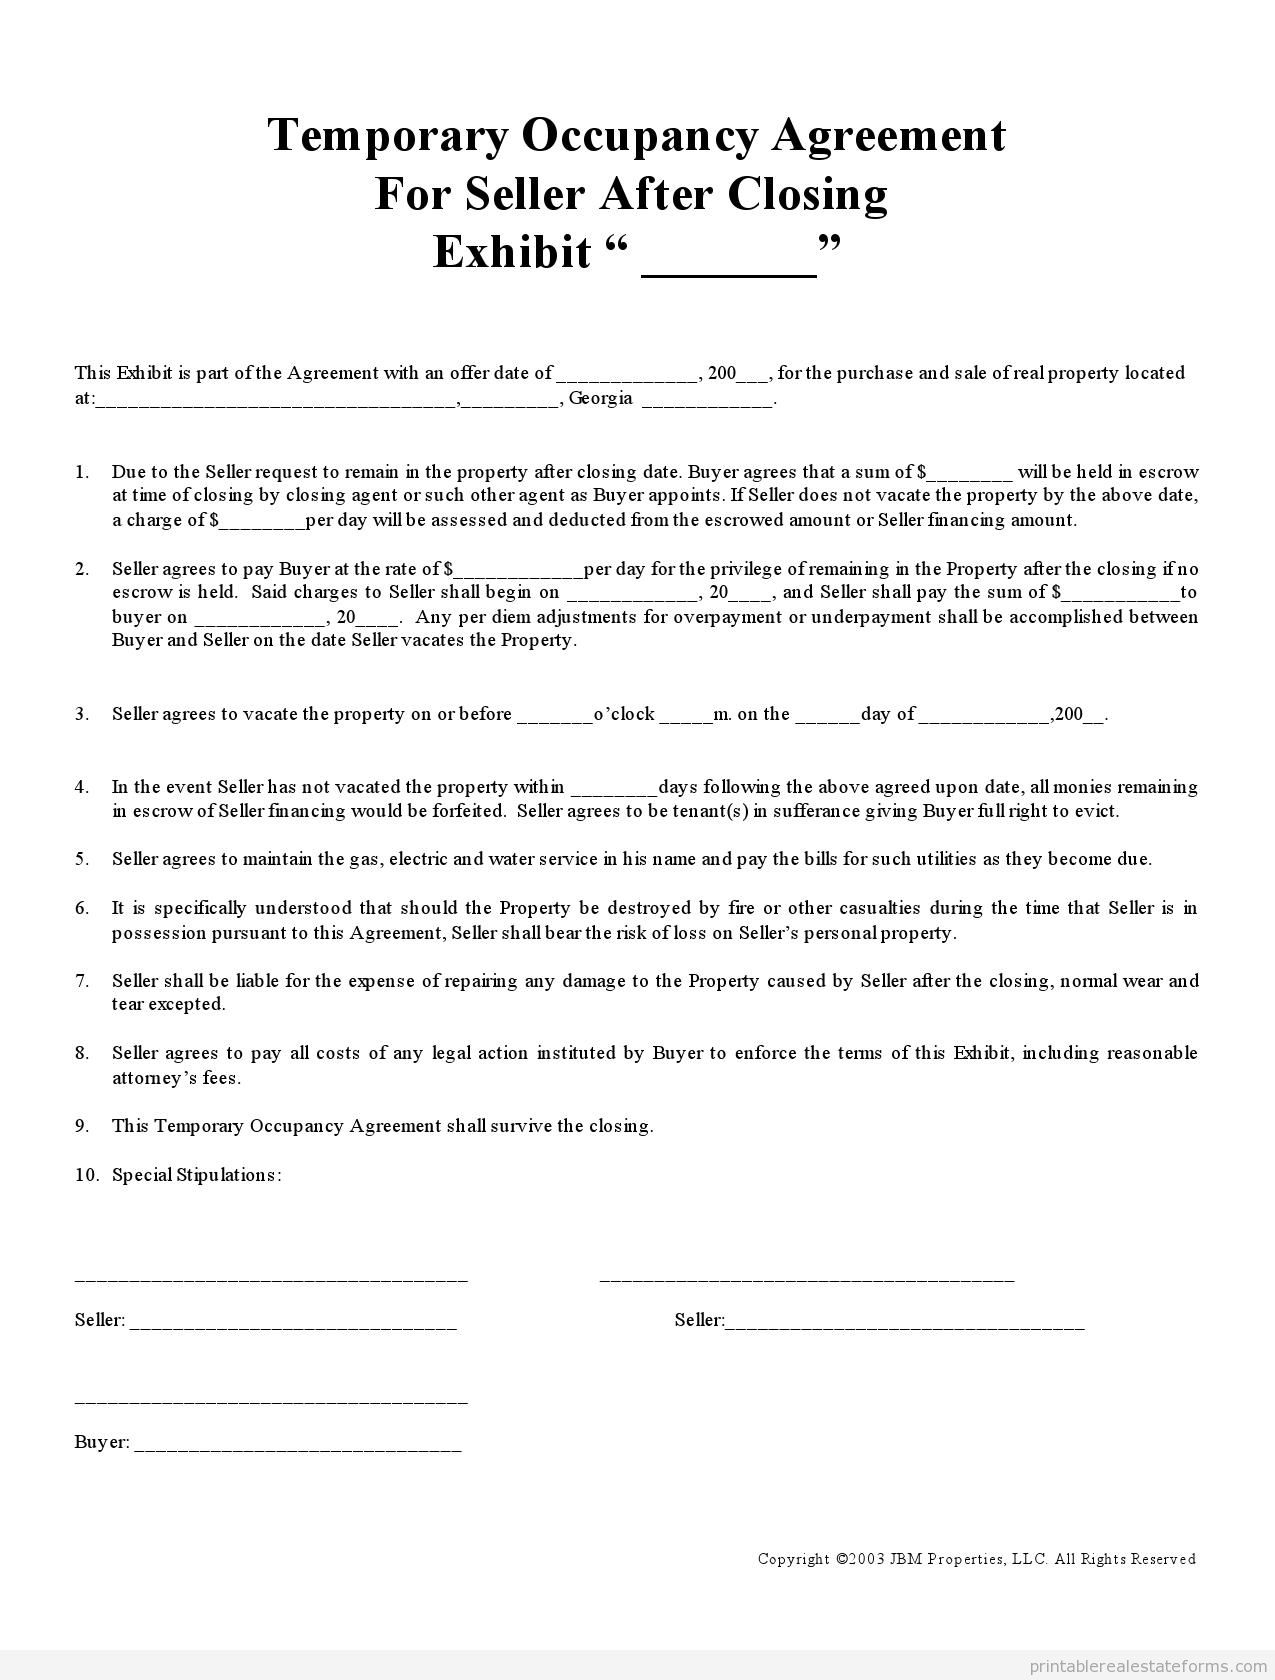 Post Closing Occupancy Agreement Free Temporary Occupancy Agreement Template Word Form